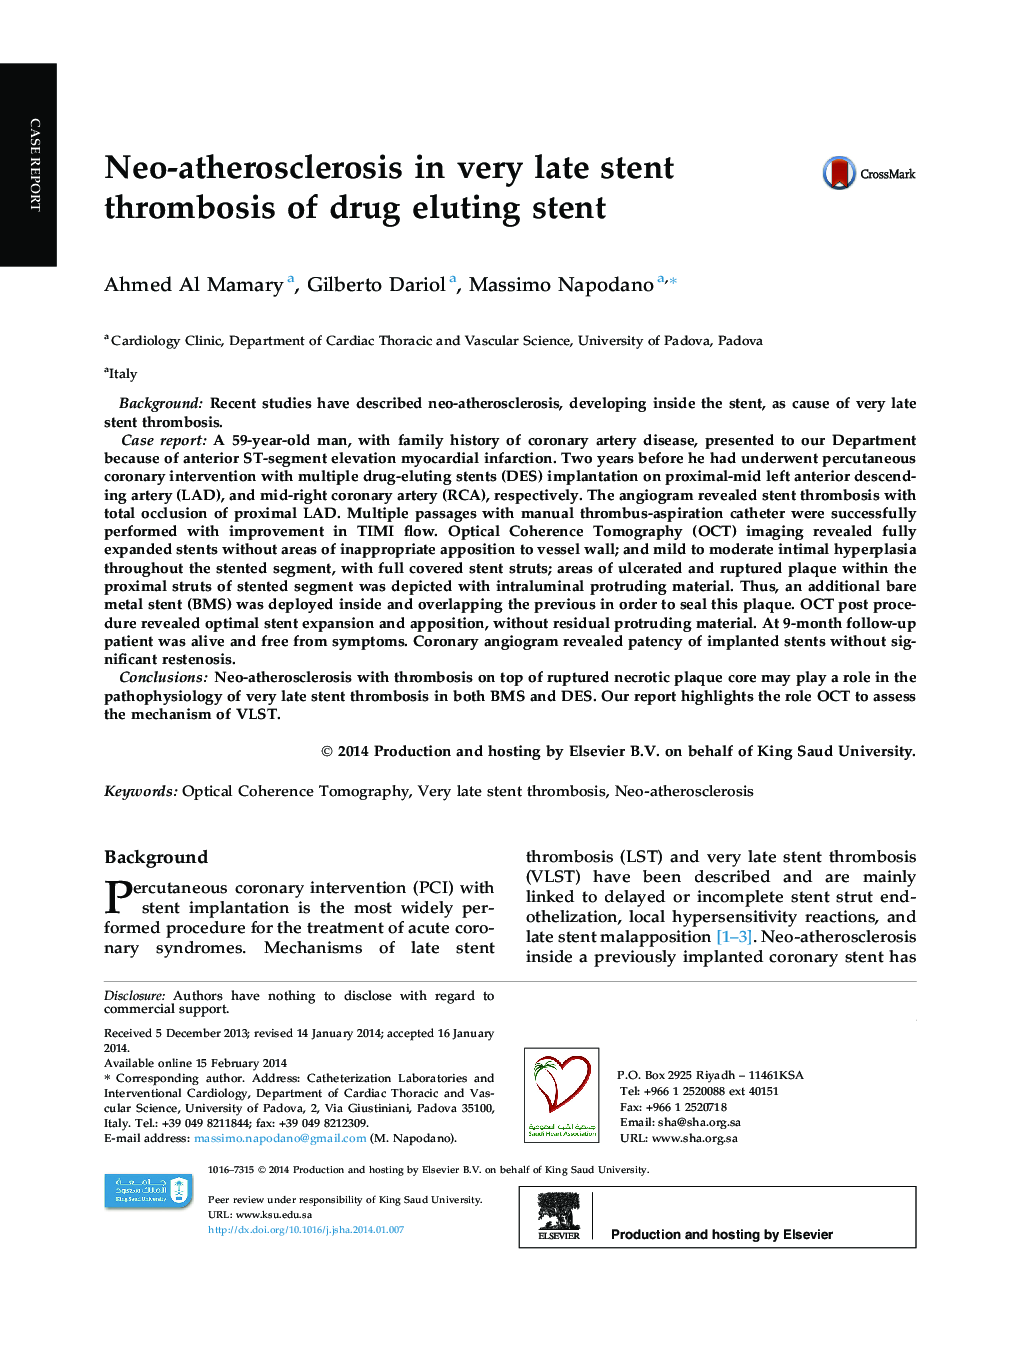 Neo-atherosclerosis in very late stent thrombosis of drug eluting stent 